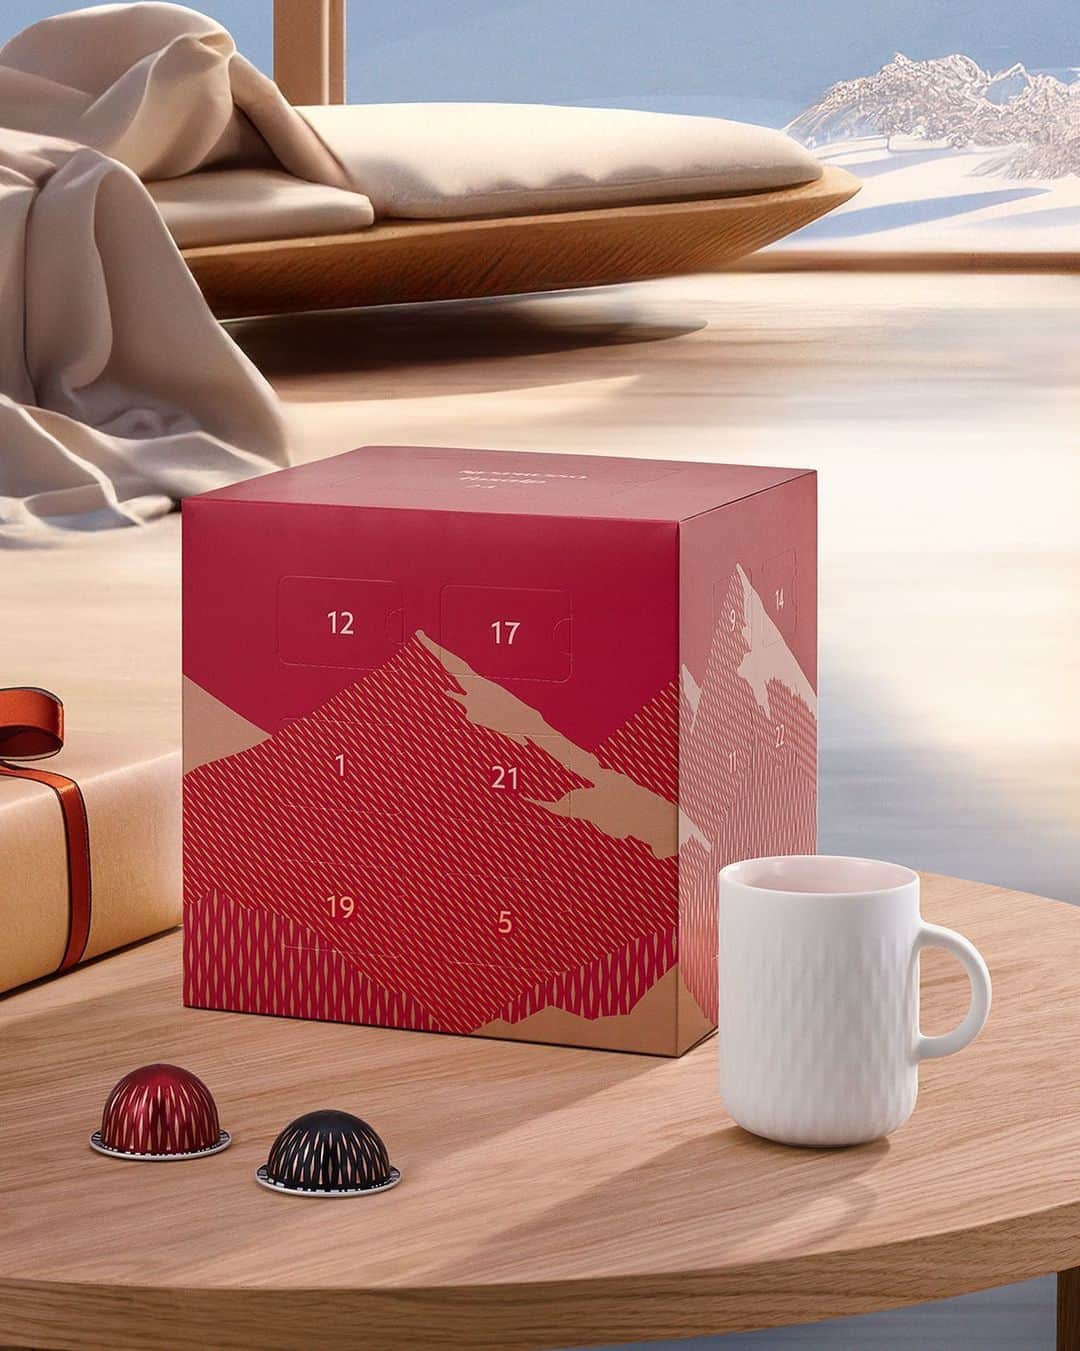 Nespressoのインスタグラム：「Unbox an unforgettable Nespresso coffee each day! Treat yourself or surprise someone special with the Nespresso X @Fusalp Advent Calendar. #FestiveWithNespresso #NespressoGifts #NespressoxFusalp #WinterWonders」